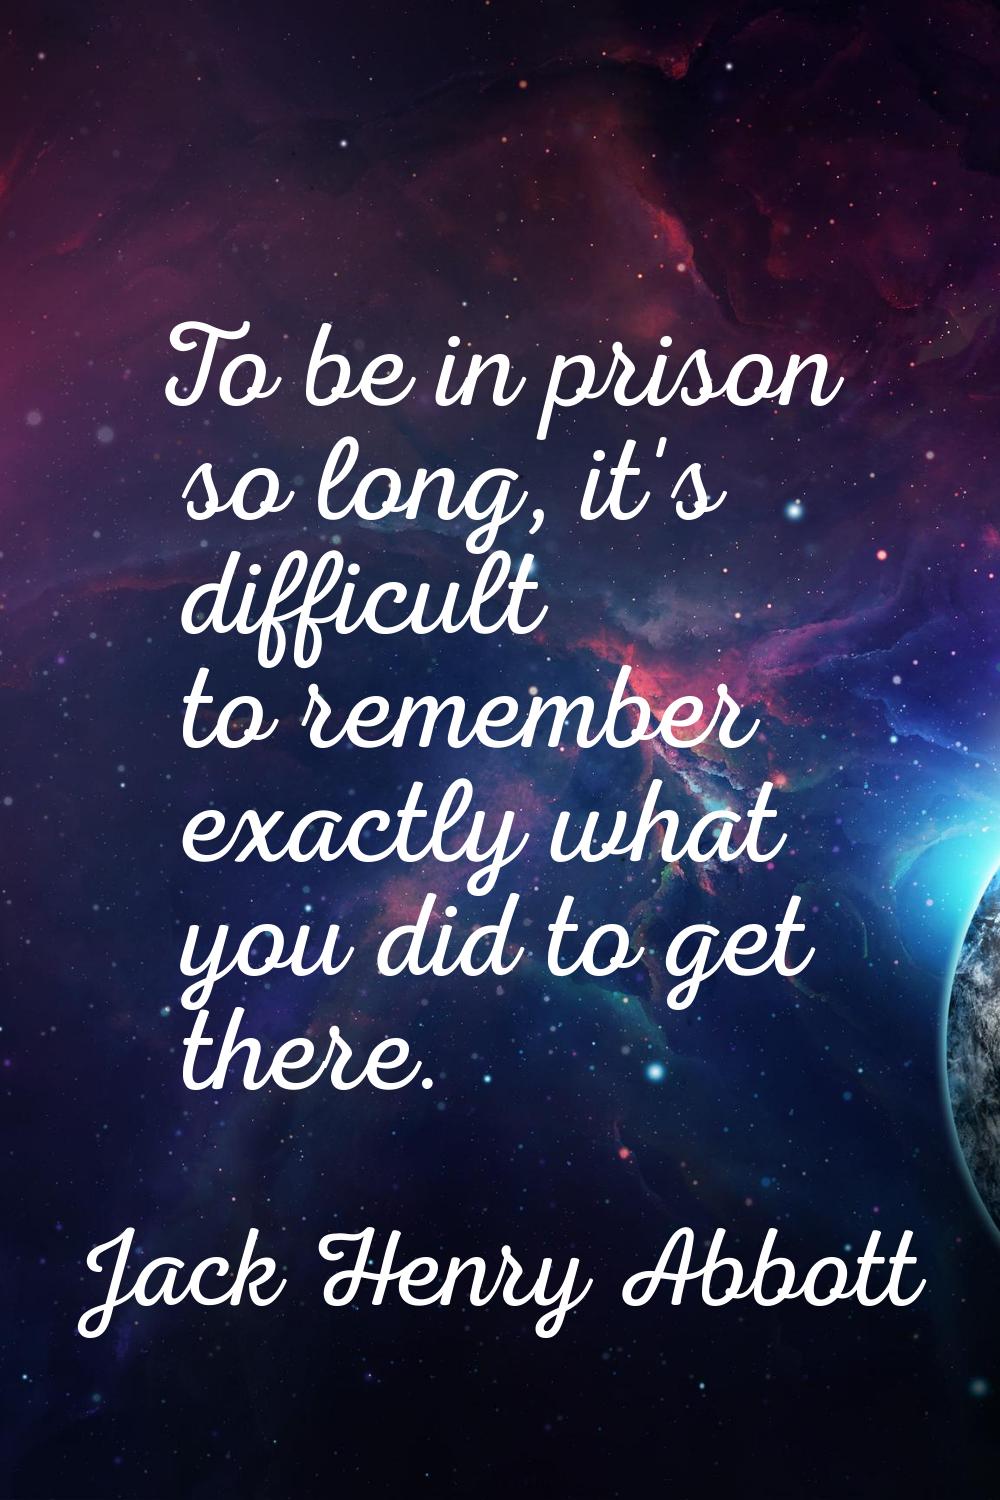 To be in prison so long, it's difficult to remember exactly what you did to get there.